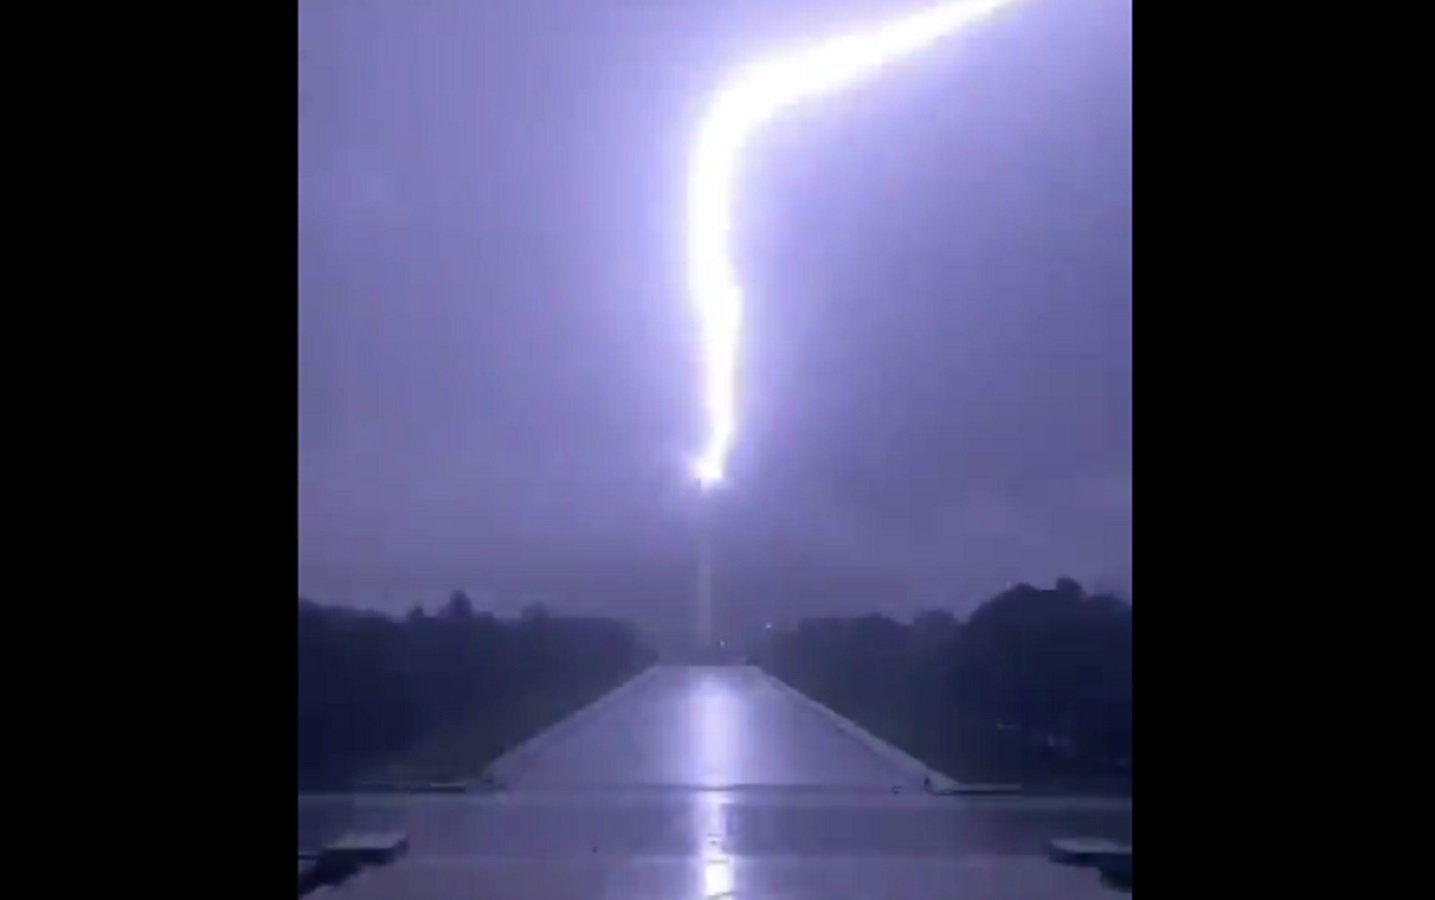 WATCH: Incredible Video Captures Moment Washington Monument Was Struck By Lightning